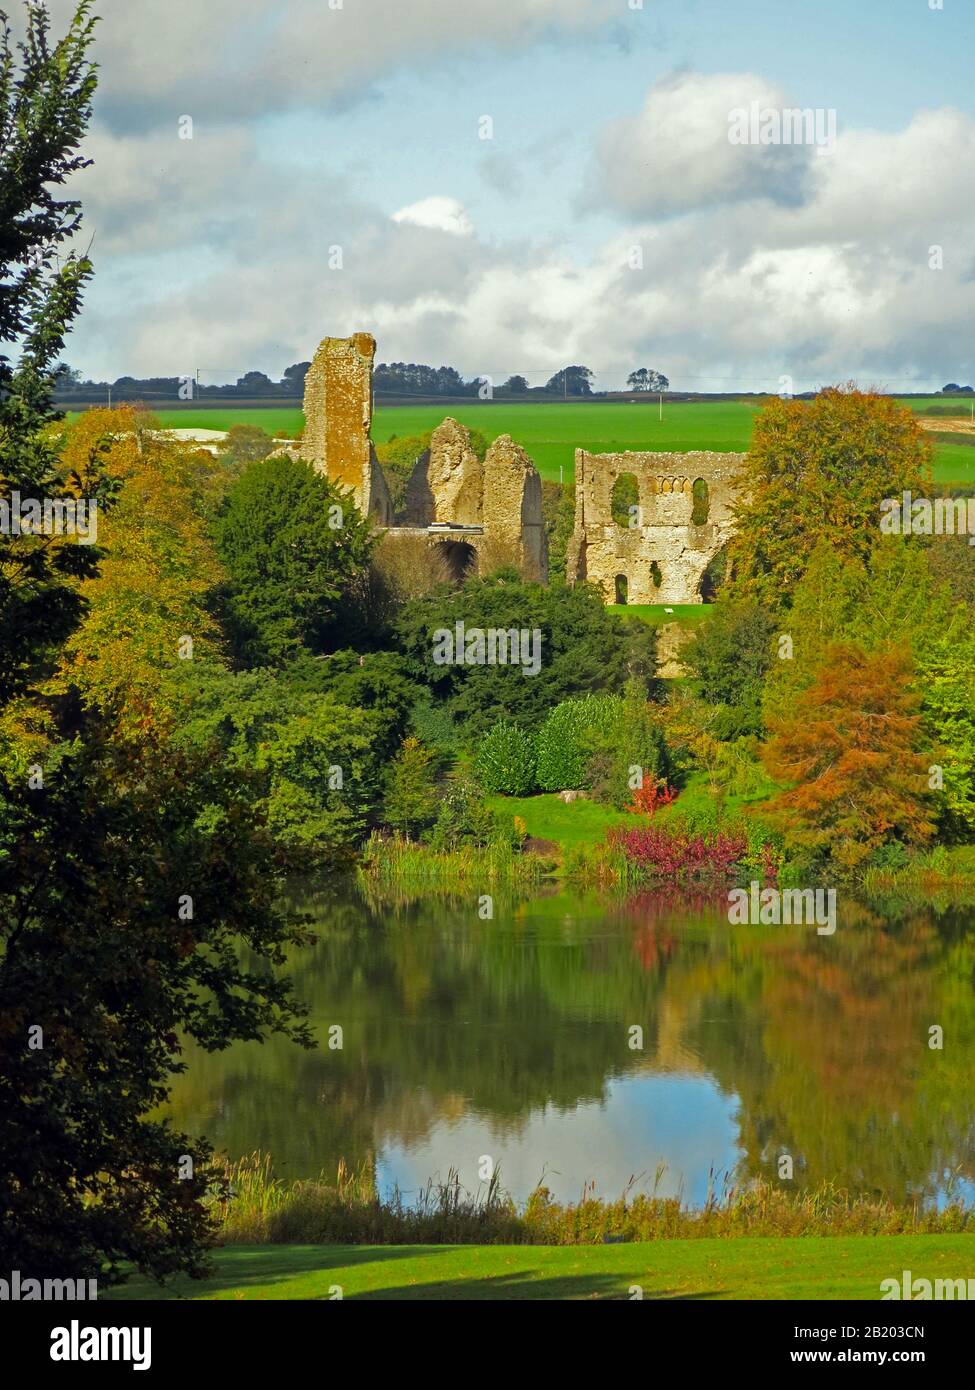 The 12th century Sherborne 'Old' Castle viewed across Capability Brown's artificial lake from the 'New' Castle, Dorset, England, UK Stock Photo